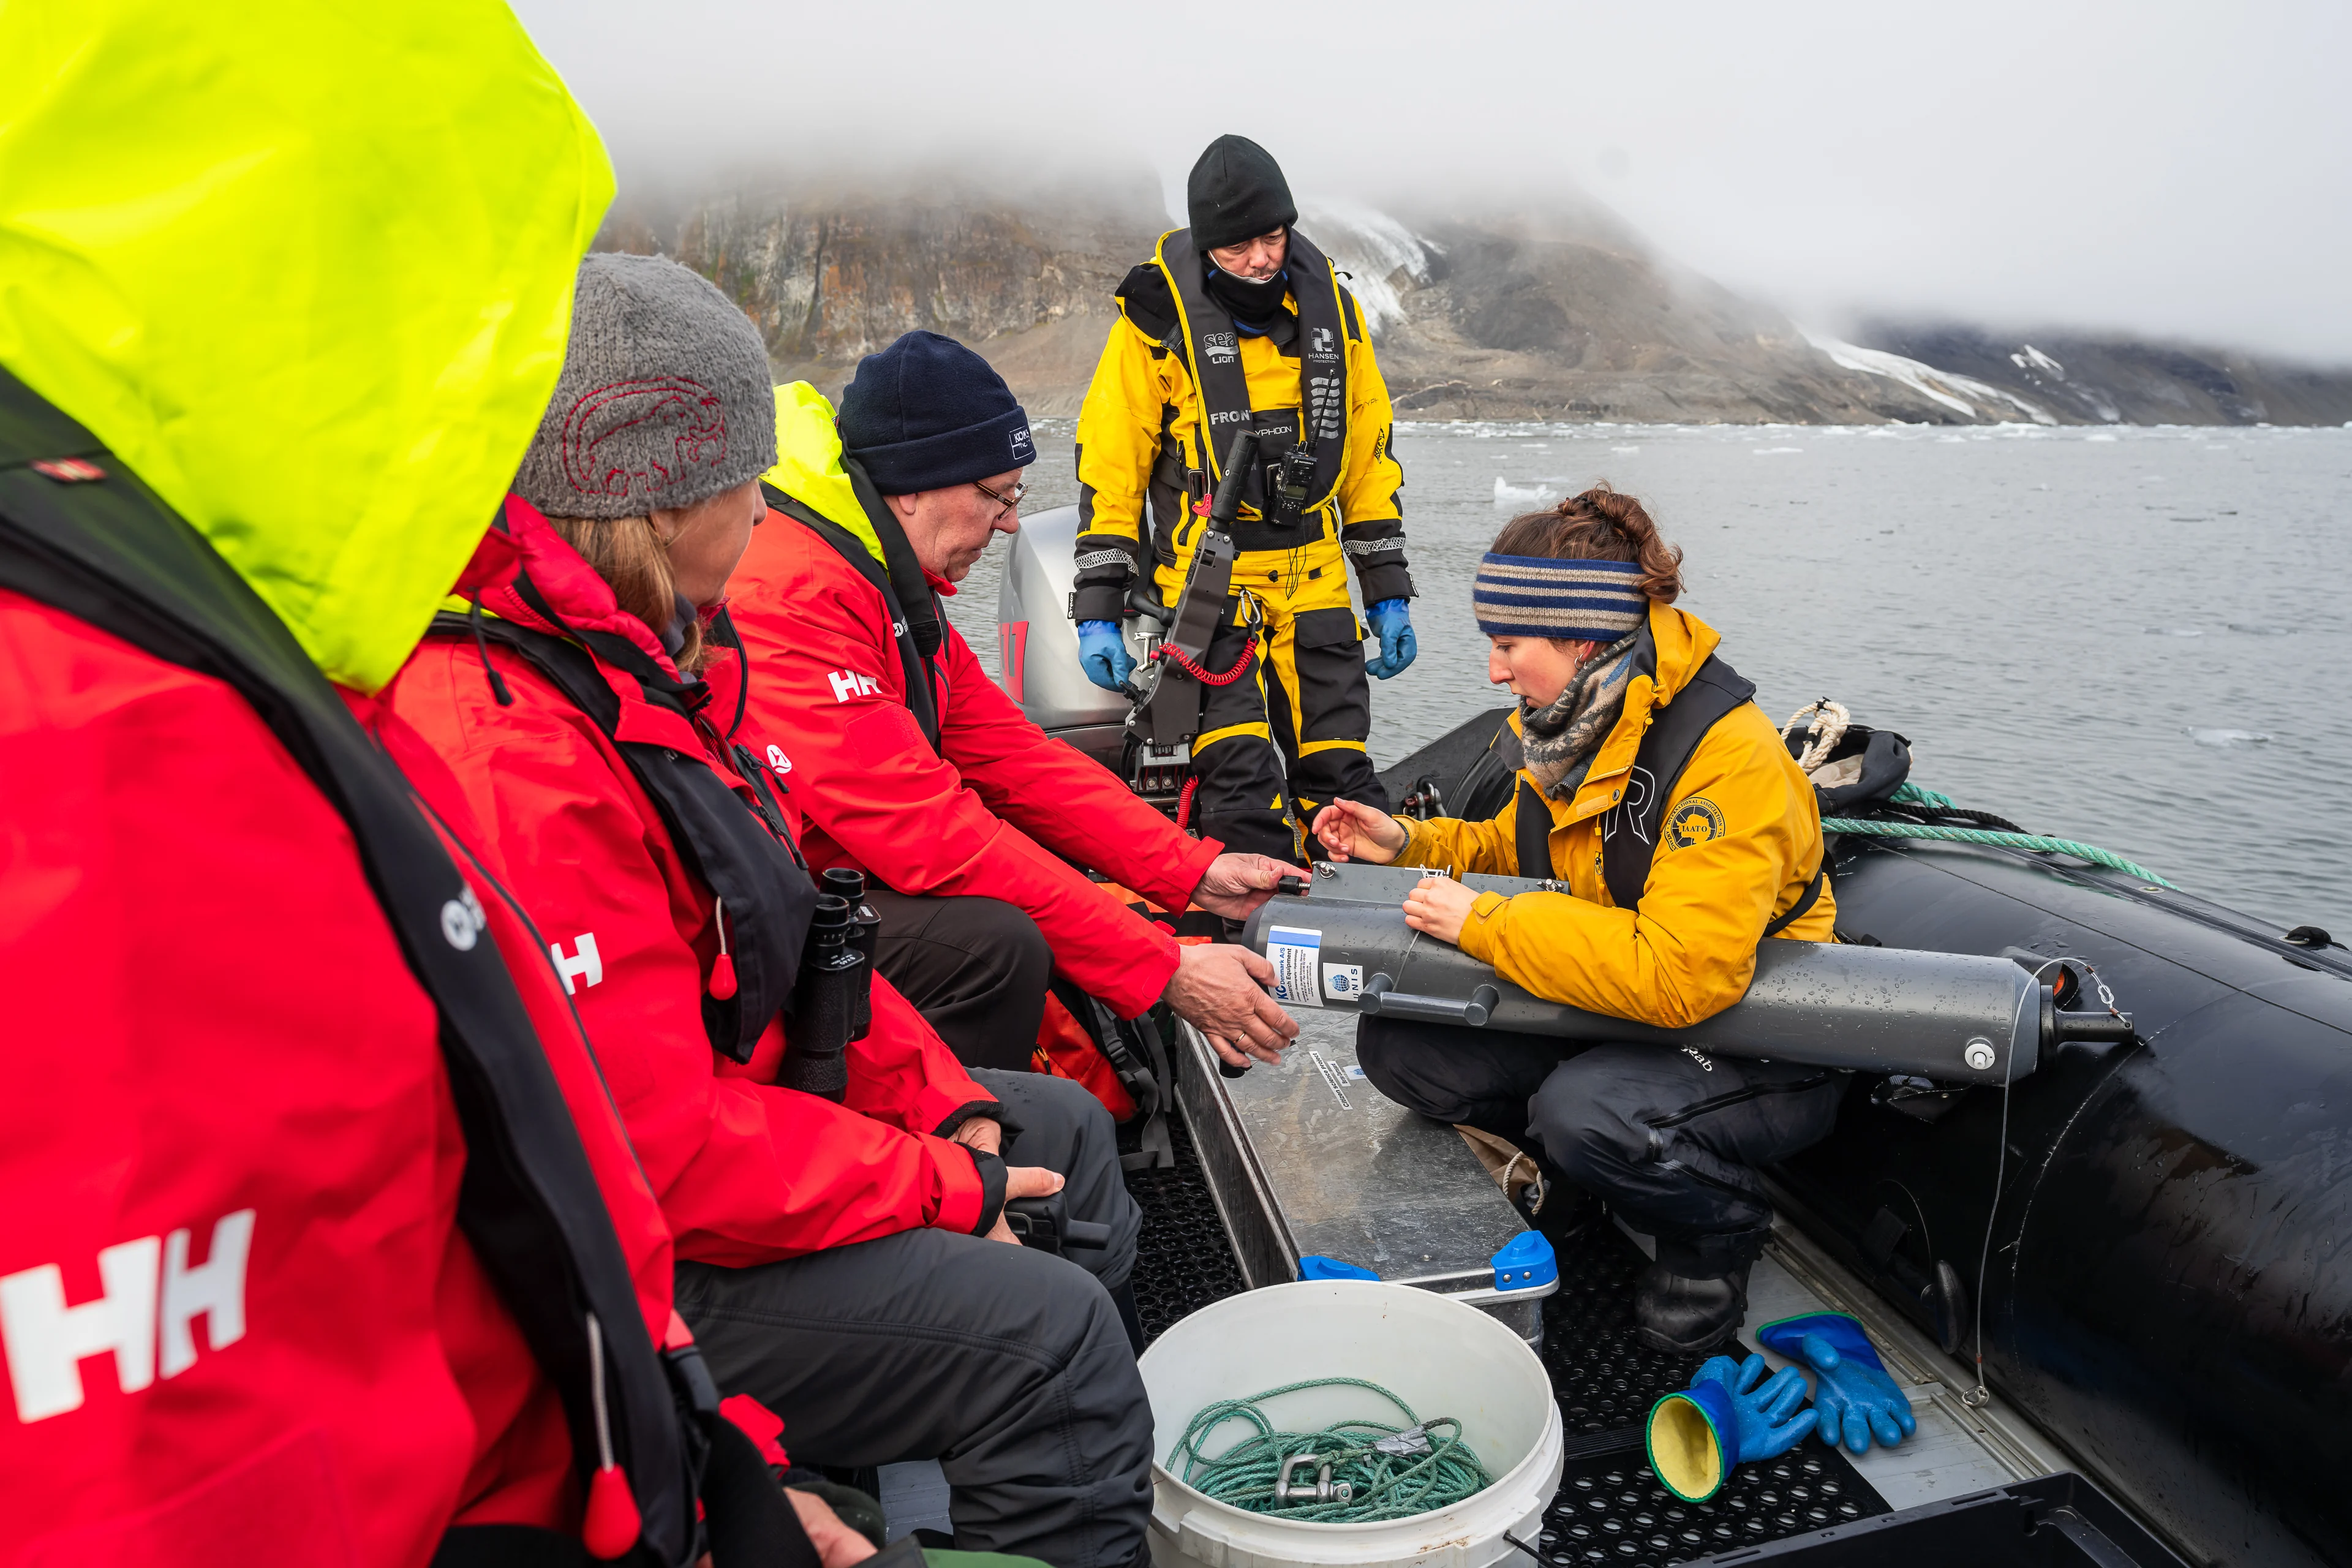 Guests and the Expedition Team collecting water samples in Hornsund, Svalbard. Photo Credit: Jan Hvizdal